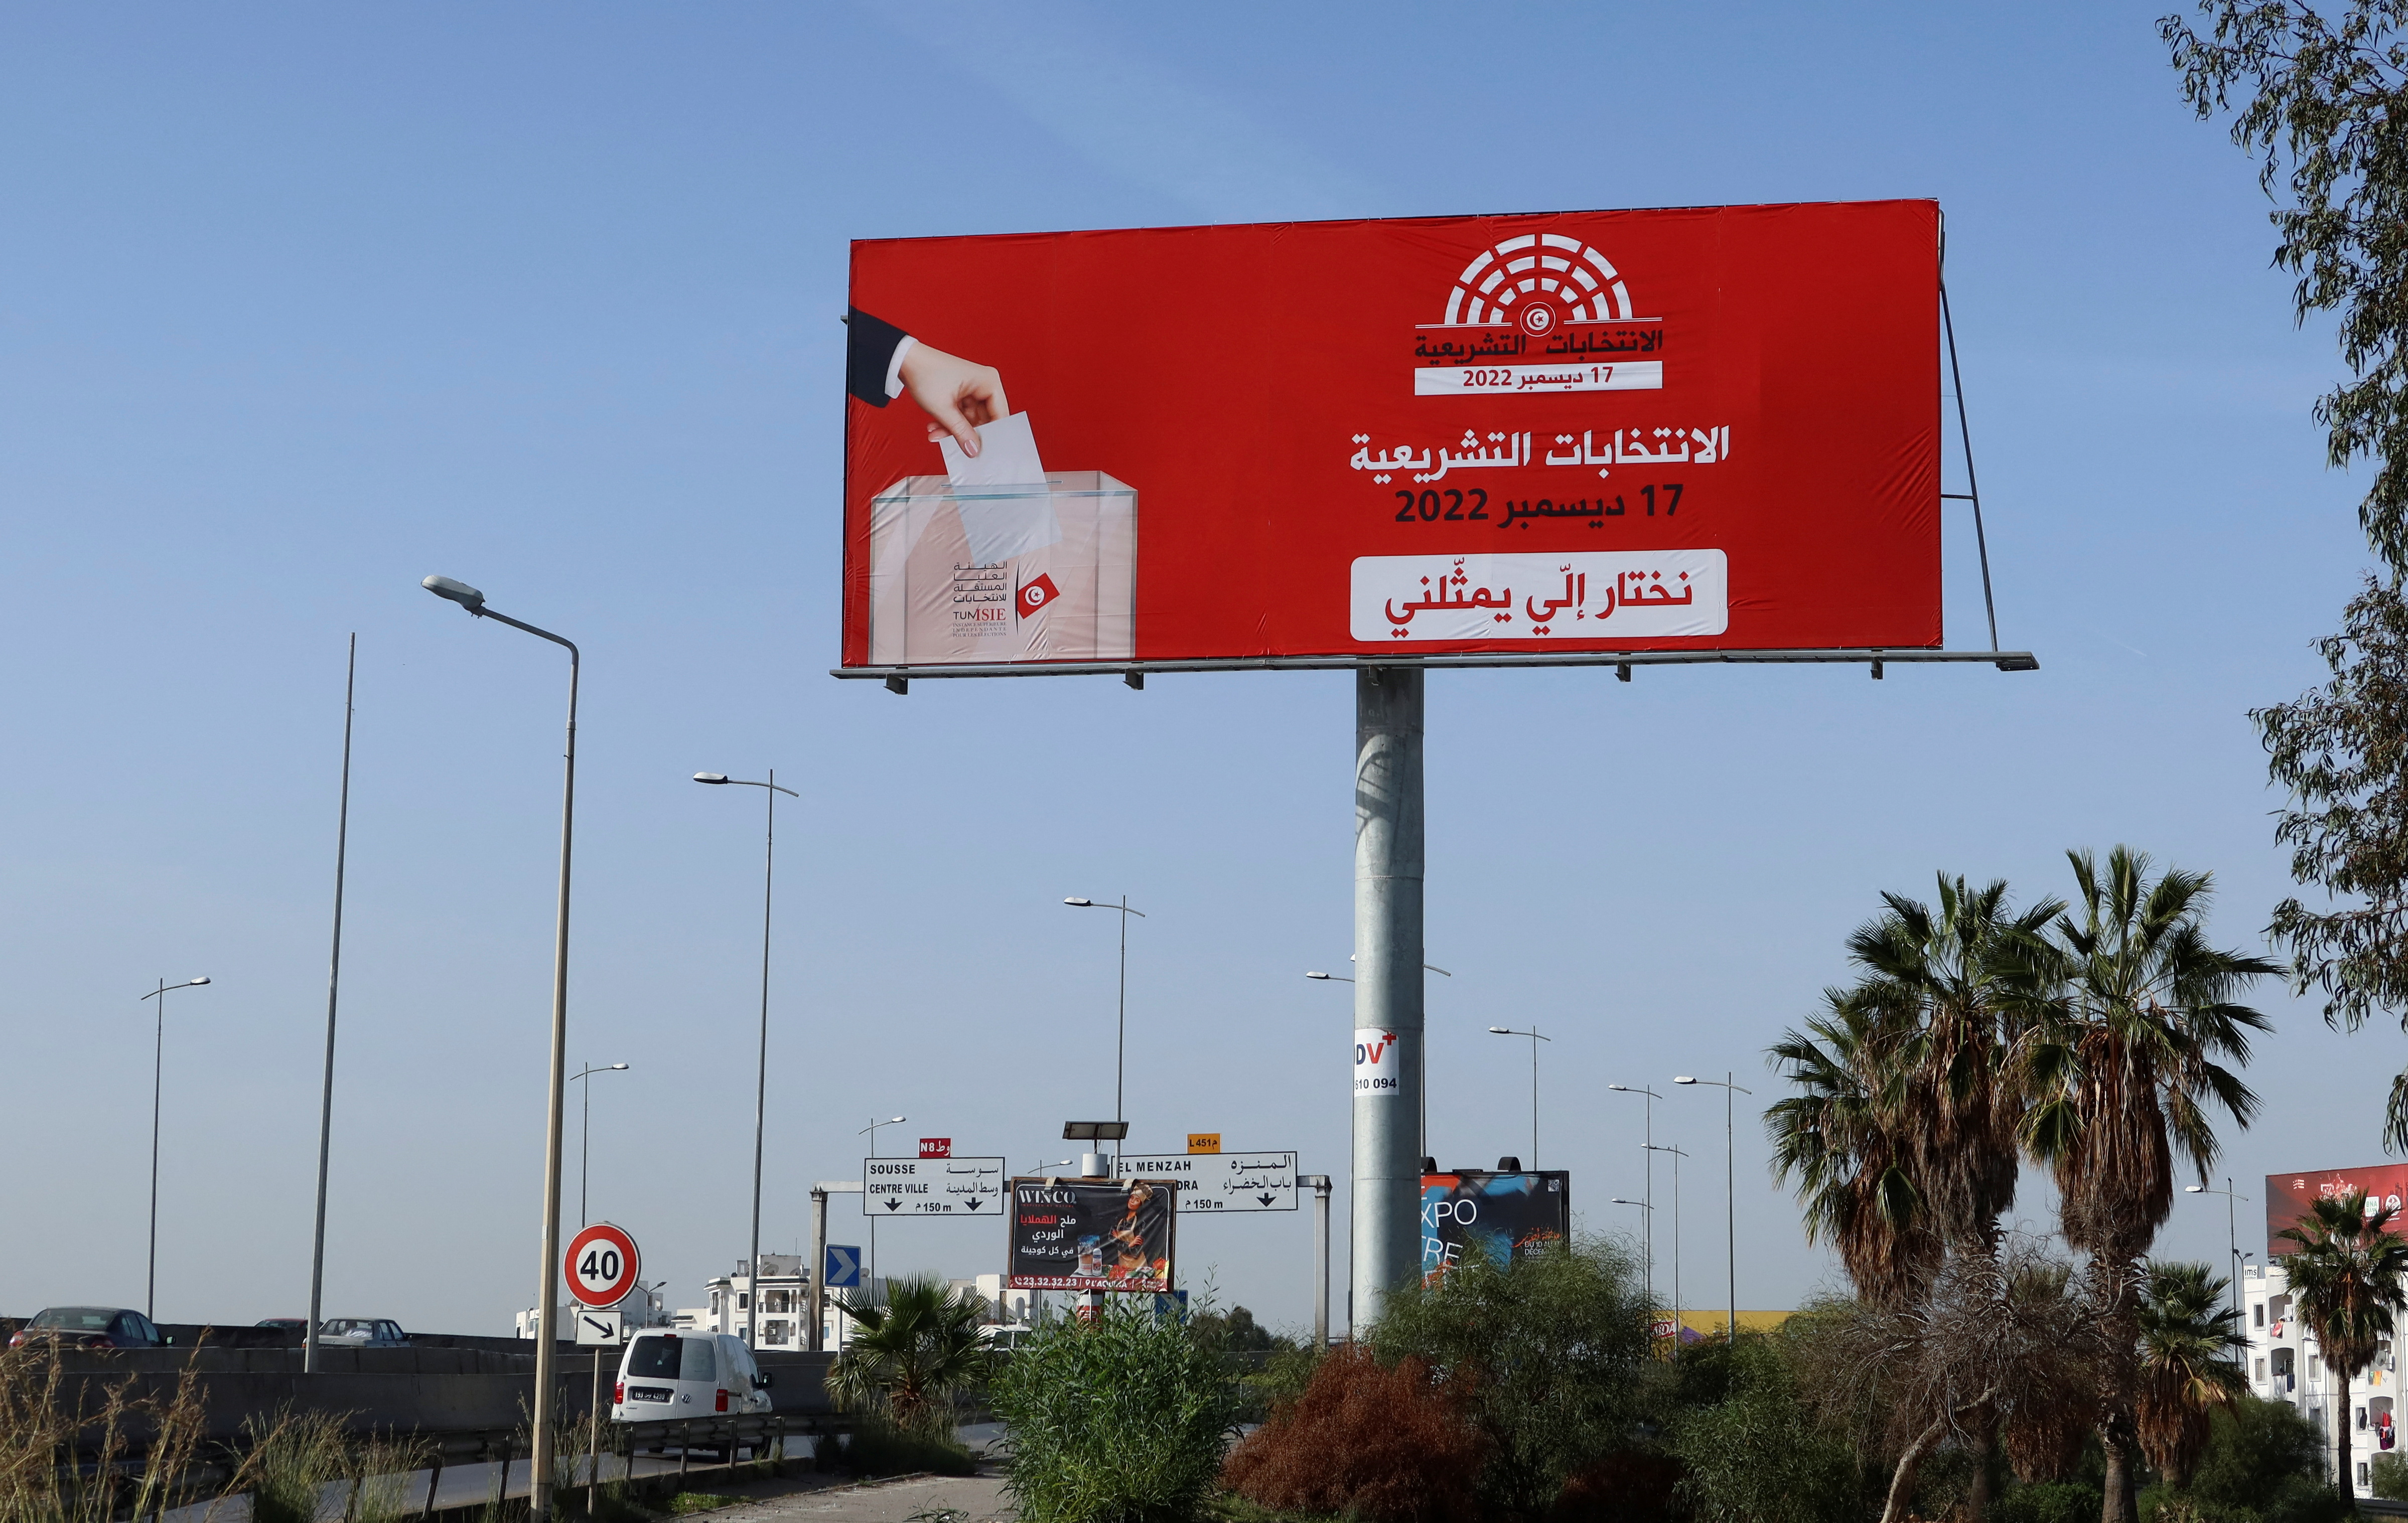 Vehicles drive past a campaign billboard for the upcoming parliamentary election in Tunis